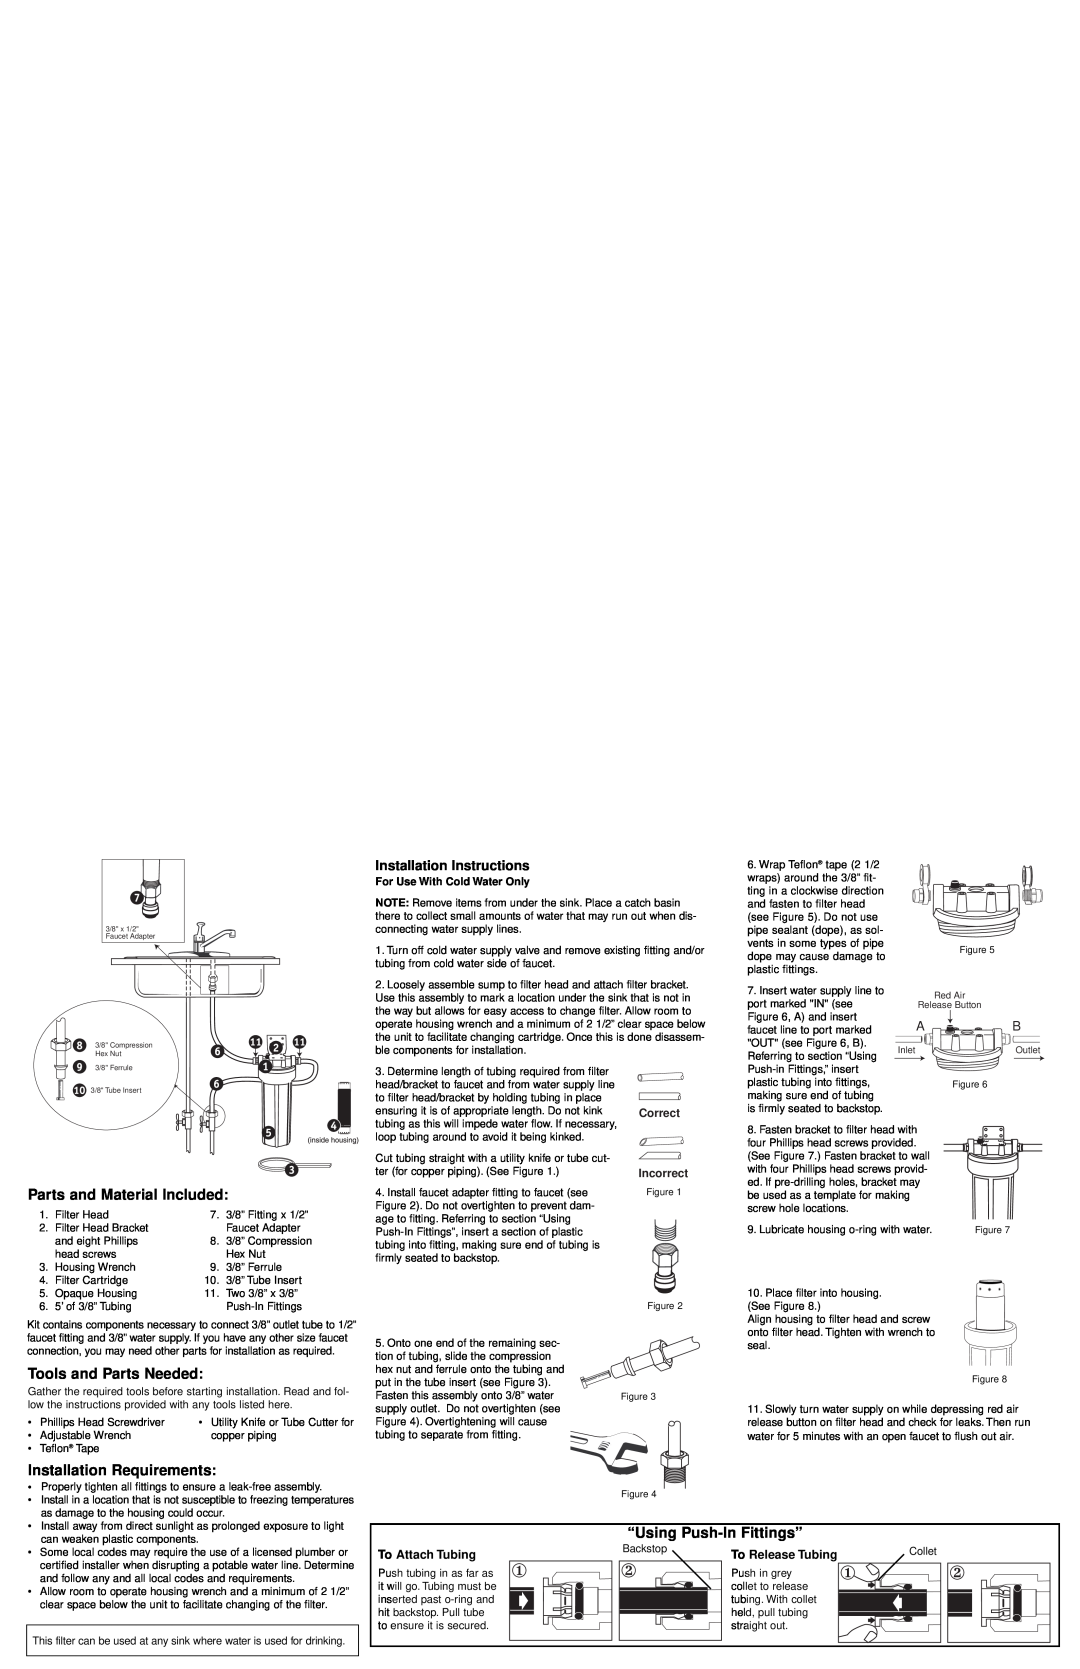 Whirlpool WHCF-DUF Parts and Material Included, Tools and Parts Needed, Installation Requirements, “Using Push-InFittings” 